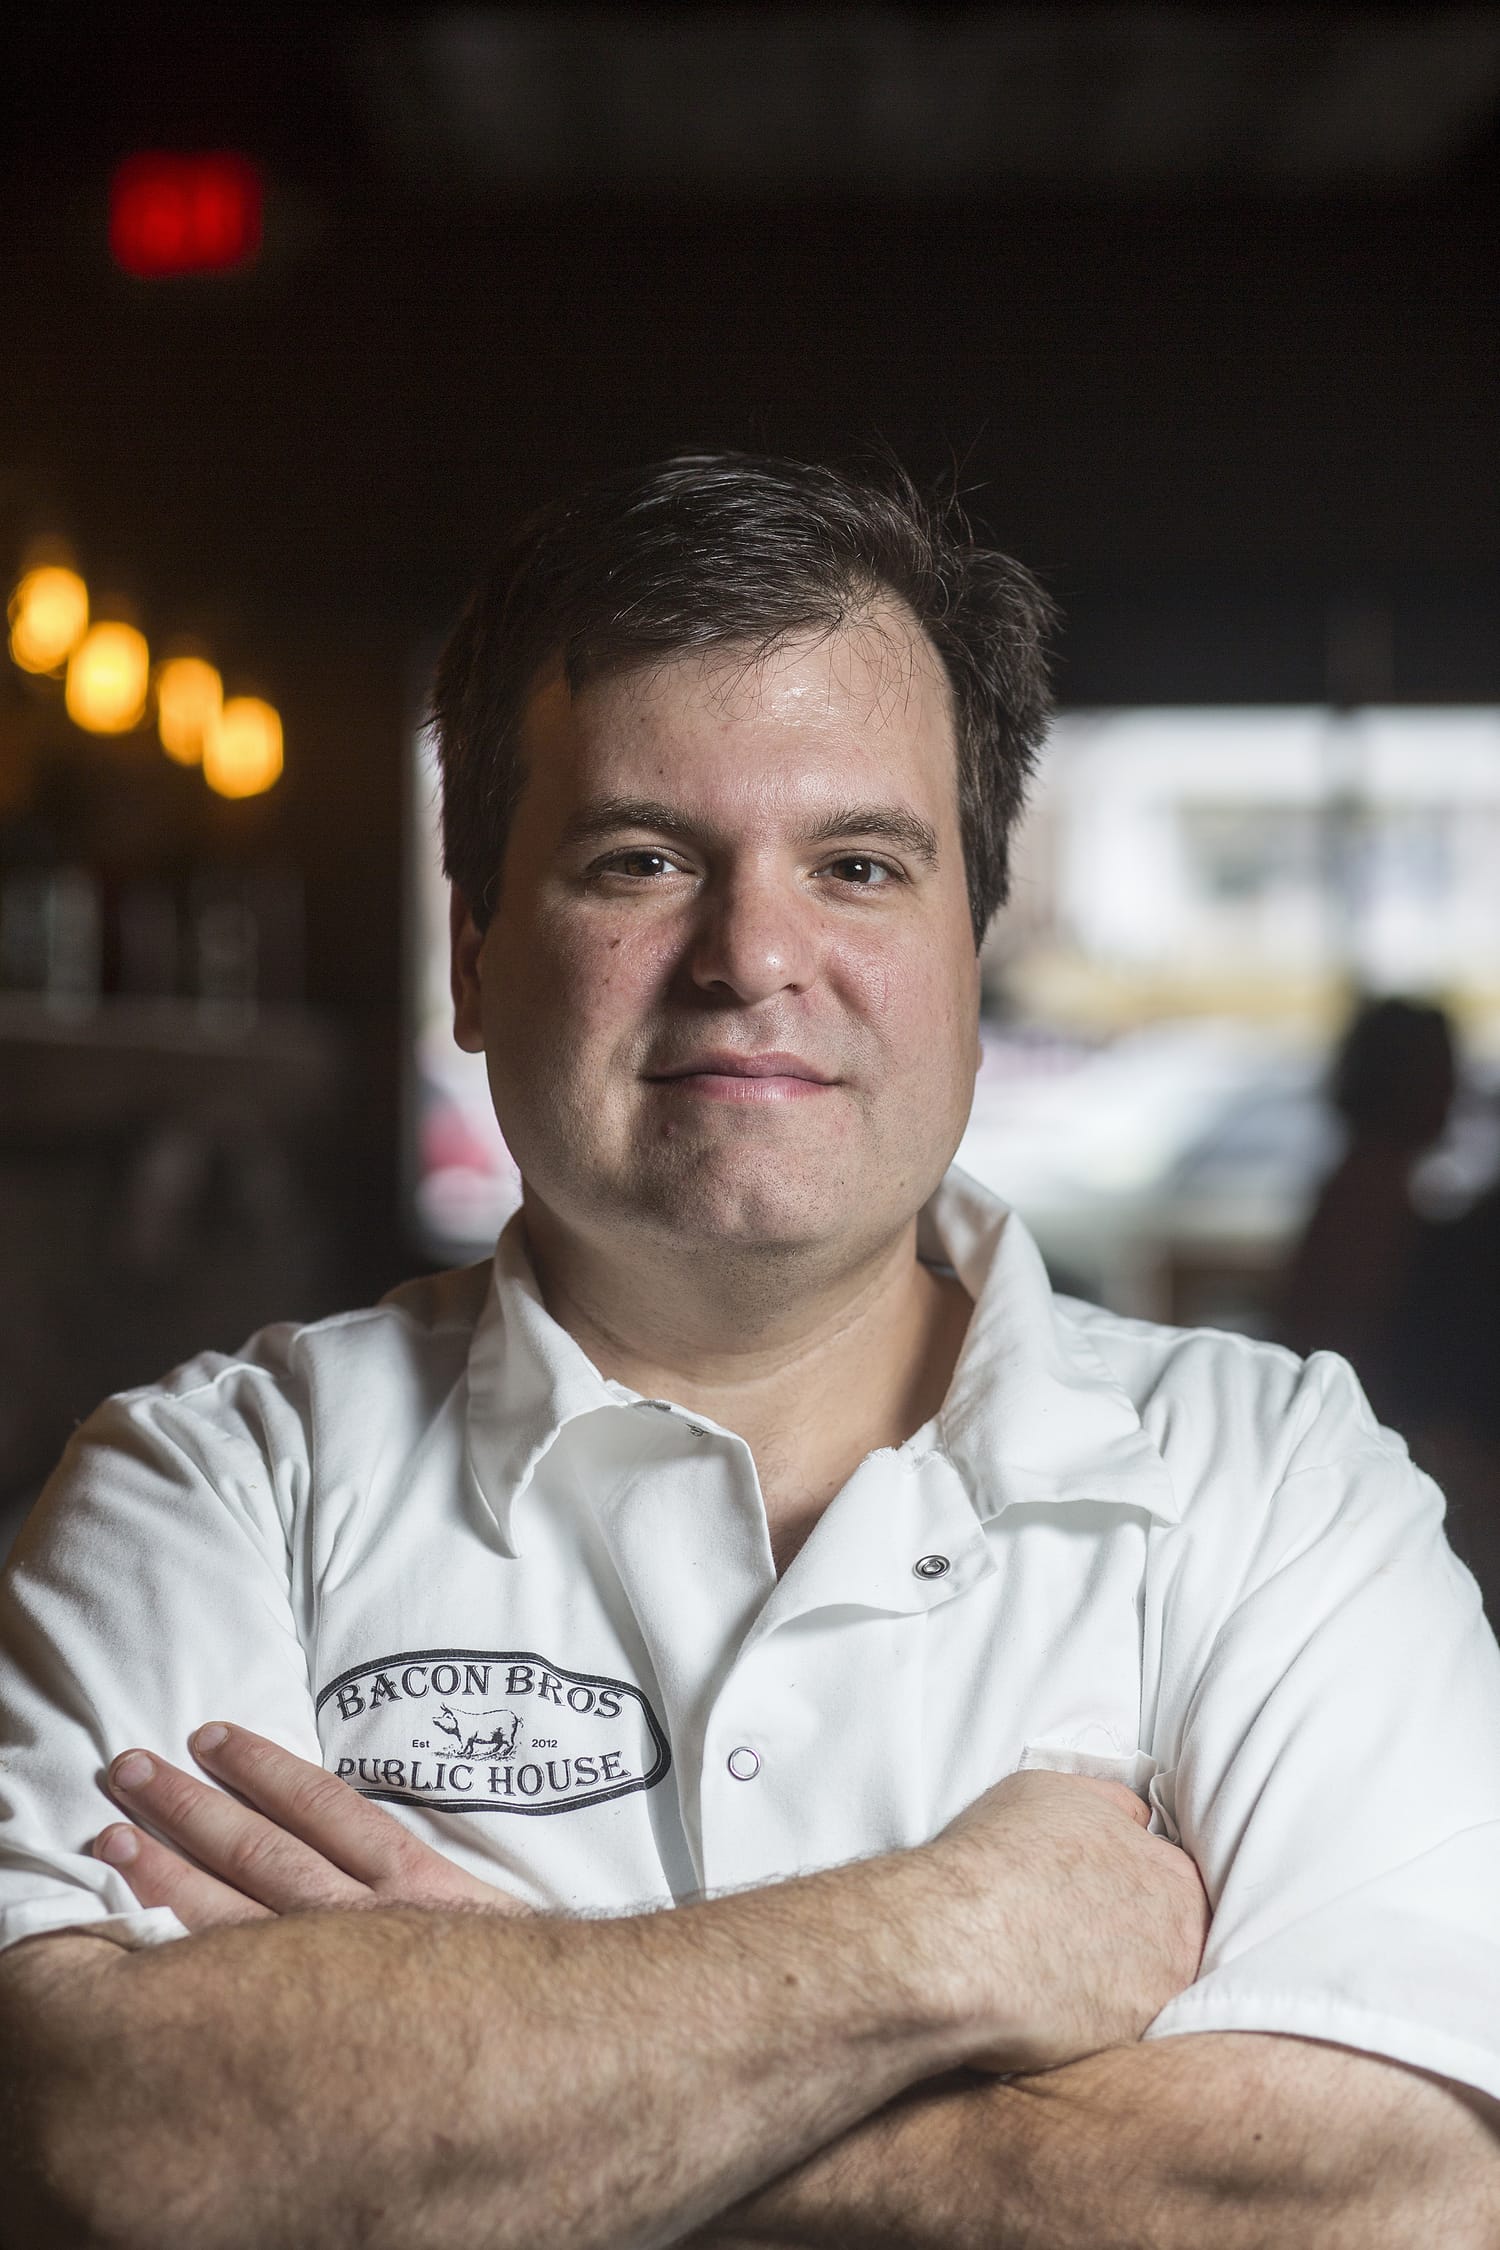 Chef Anthony Gray, Bacon Bros. Public House, Greenville, S.C.